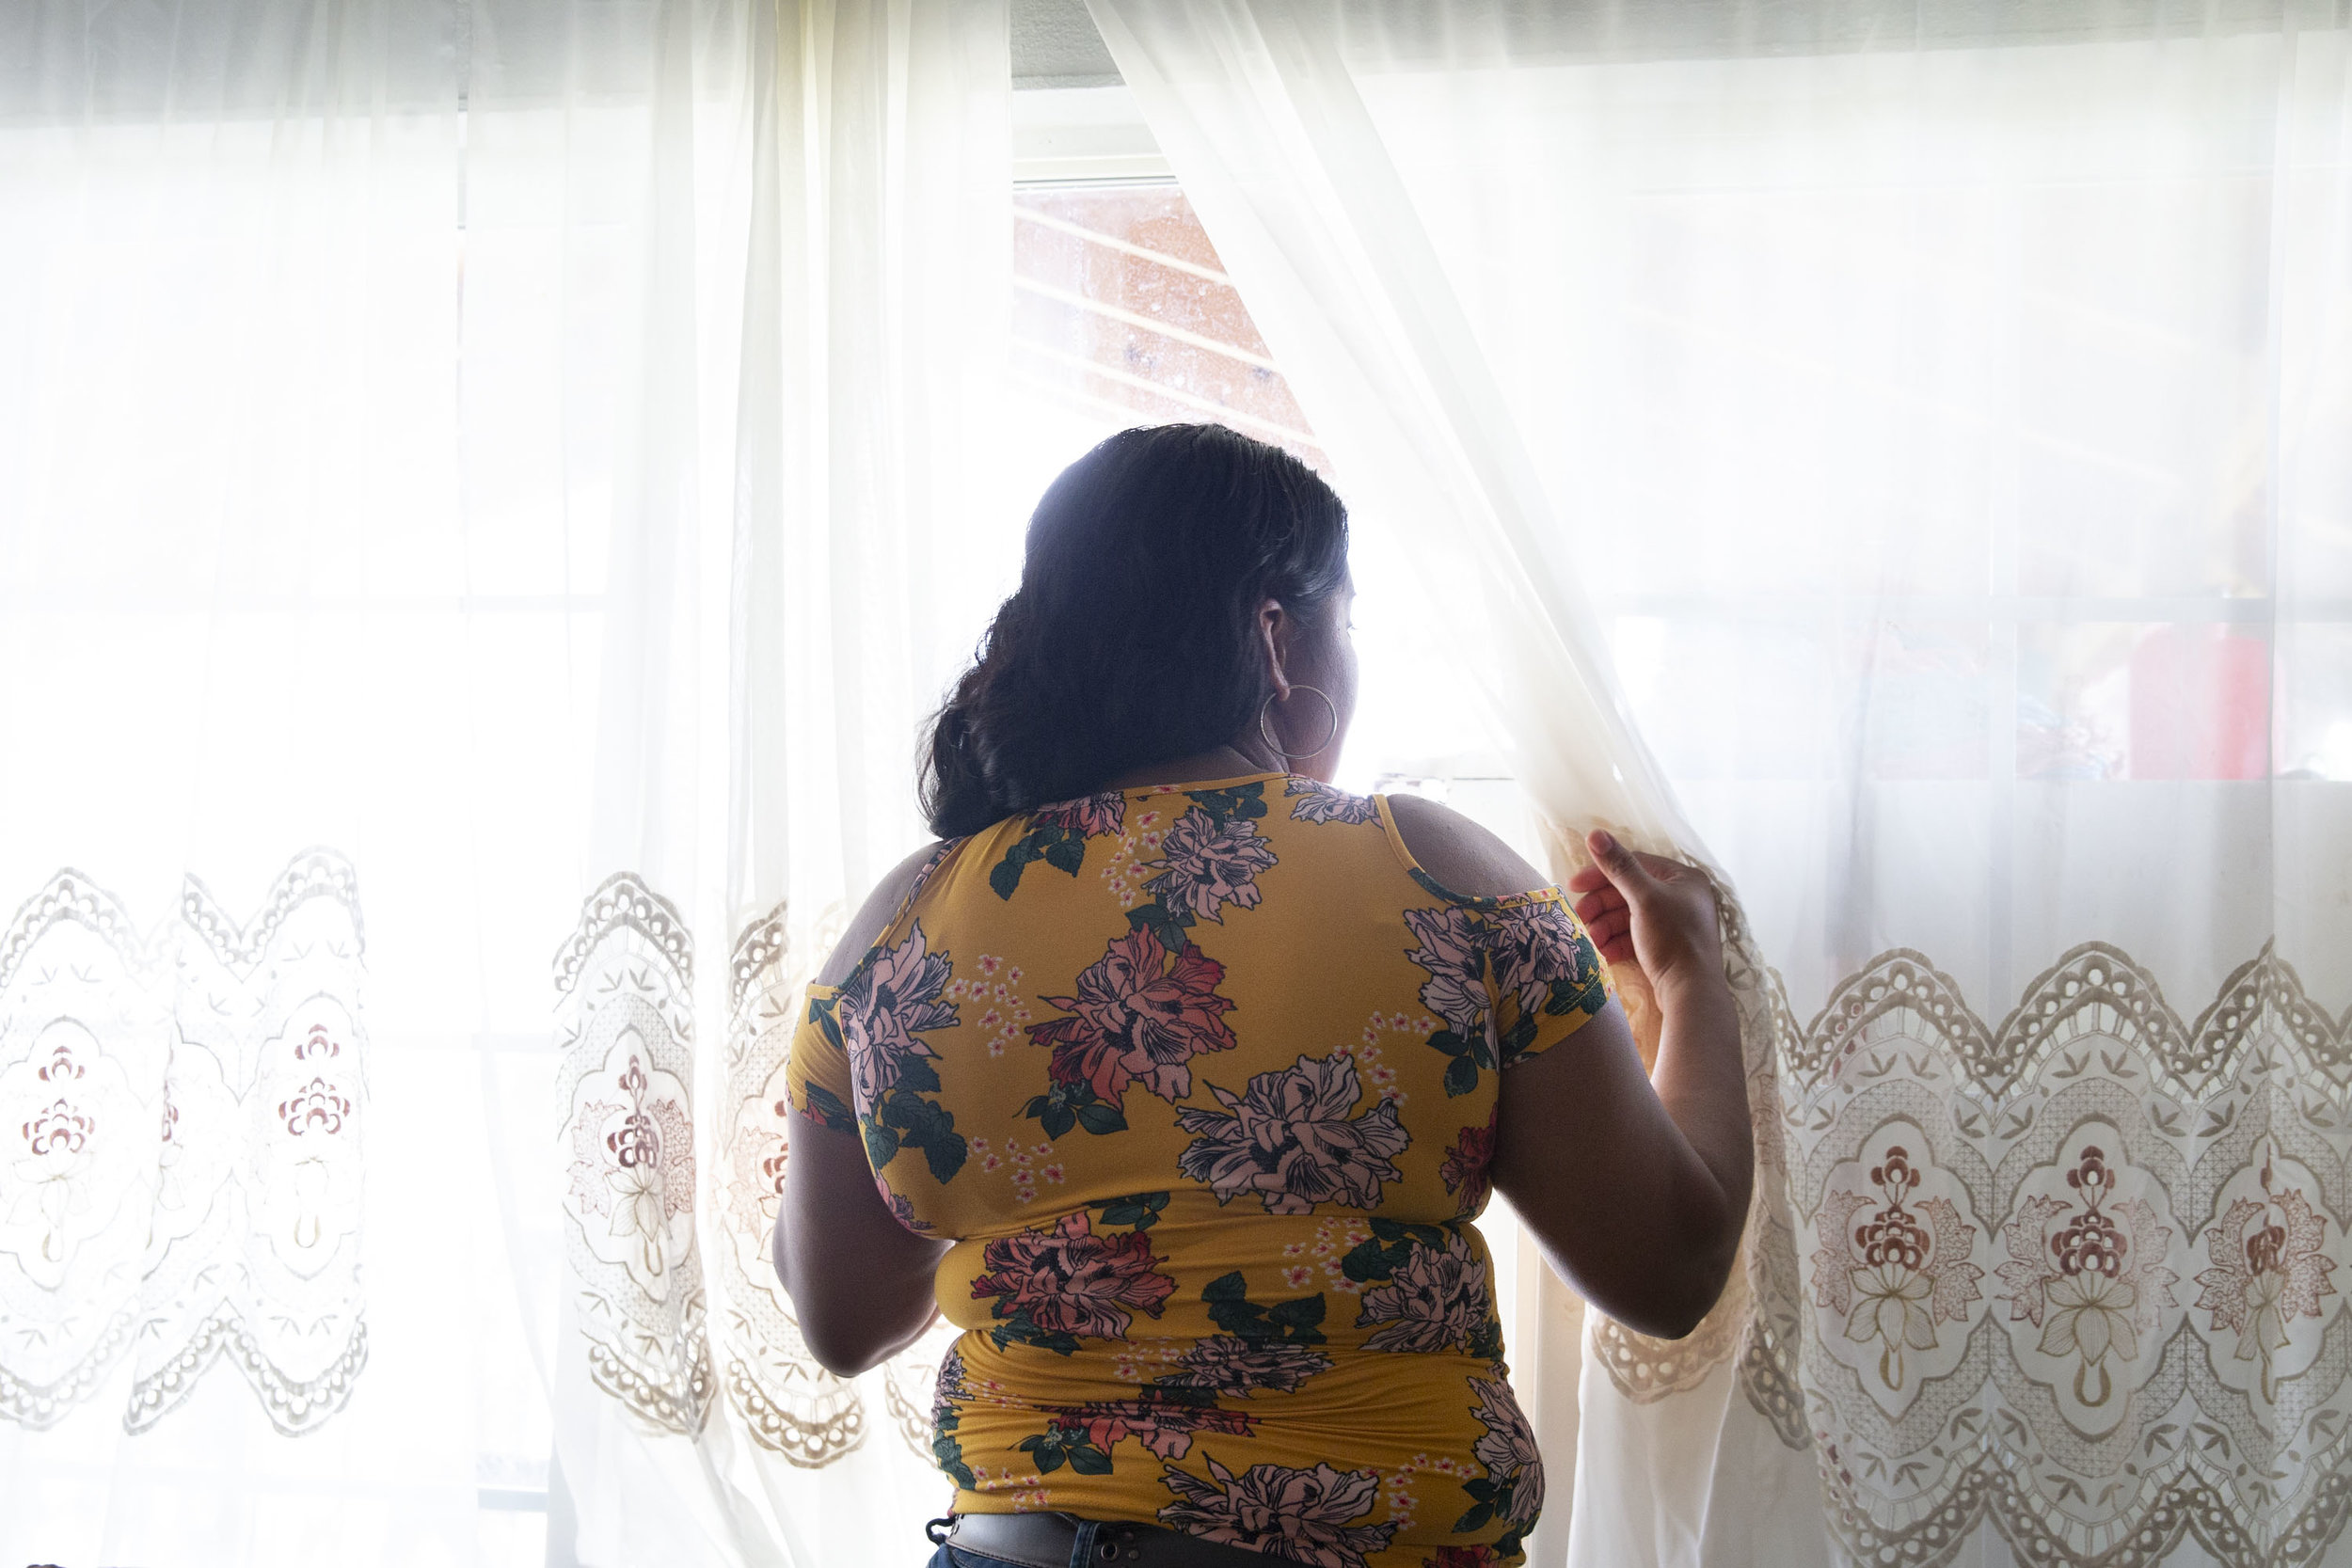  Lizeth Rosales, an asylum recipient from Honduras, looks out the window at her mother's mobile home in Kyle, Texas, on June 22, 2018. Rosales recieved asylum in 2017 after experiencing domestic violence from her son's father. “I get another chance a